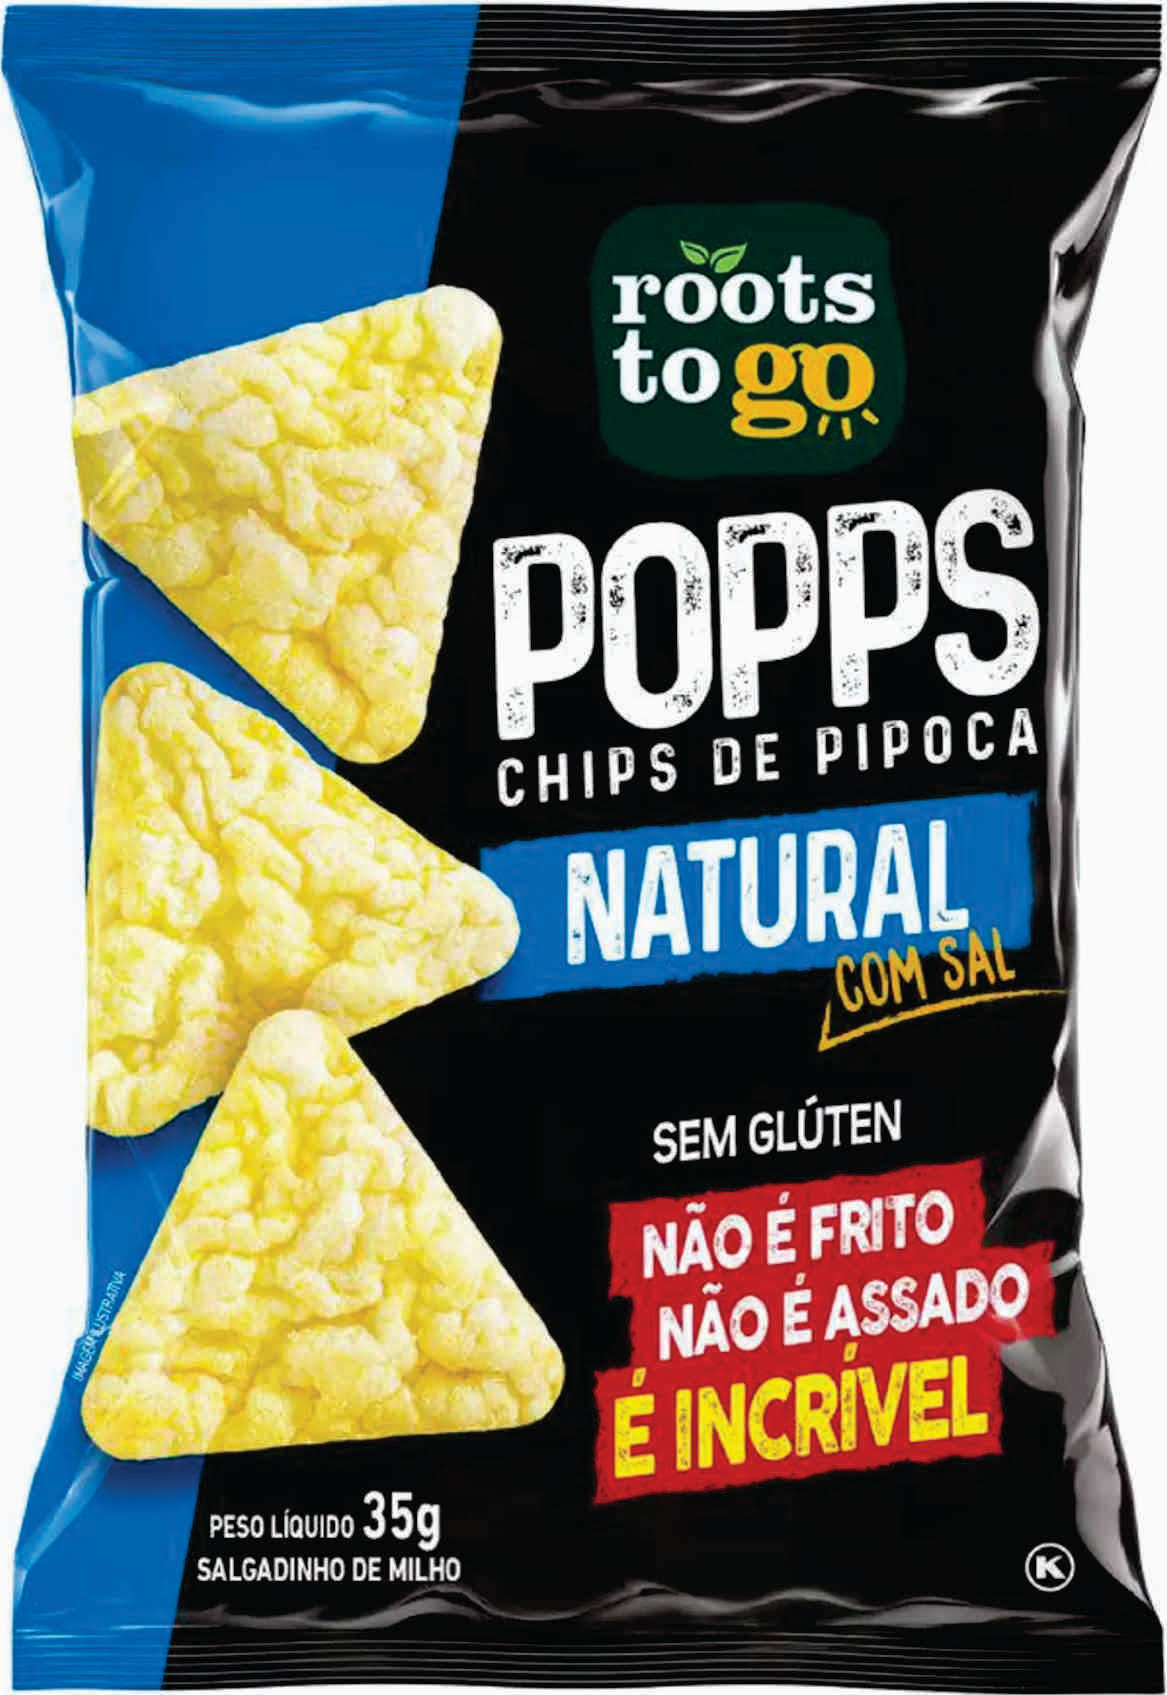 7898557010367 - CHIPS DE PIPOCA NATURAL ROOTS TO GO POPPS PACOTE 35G